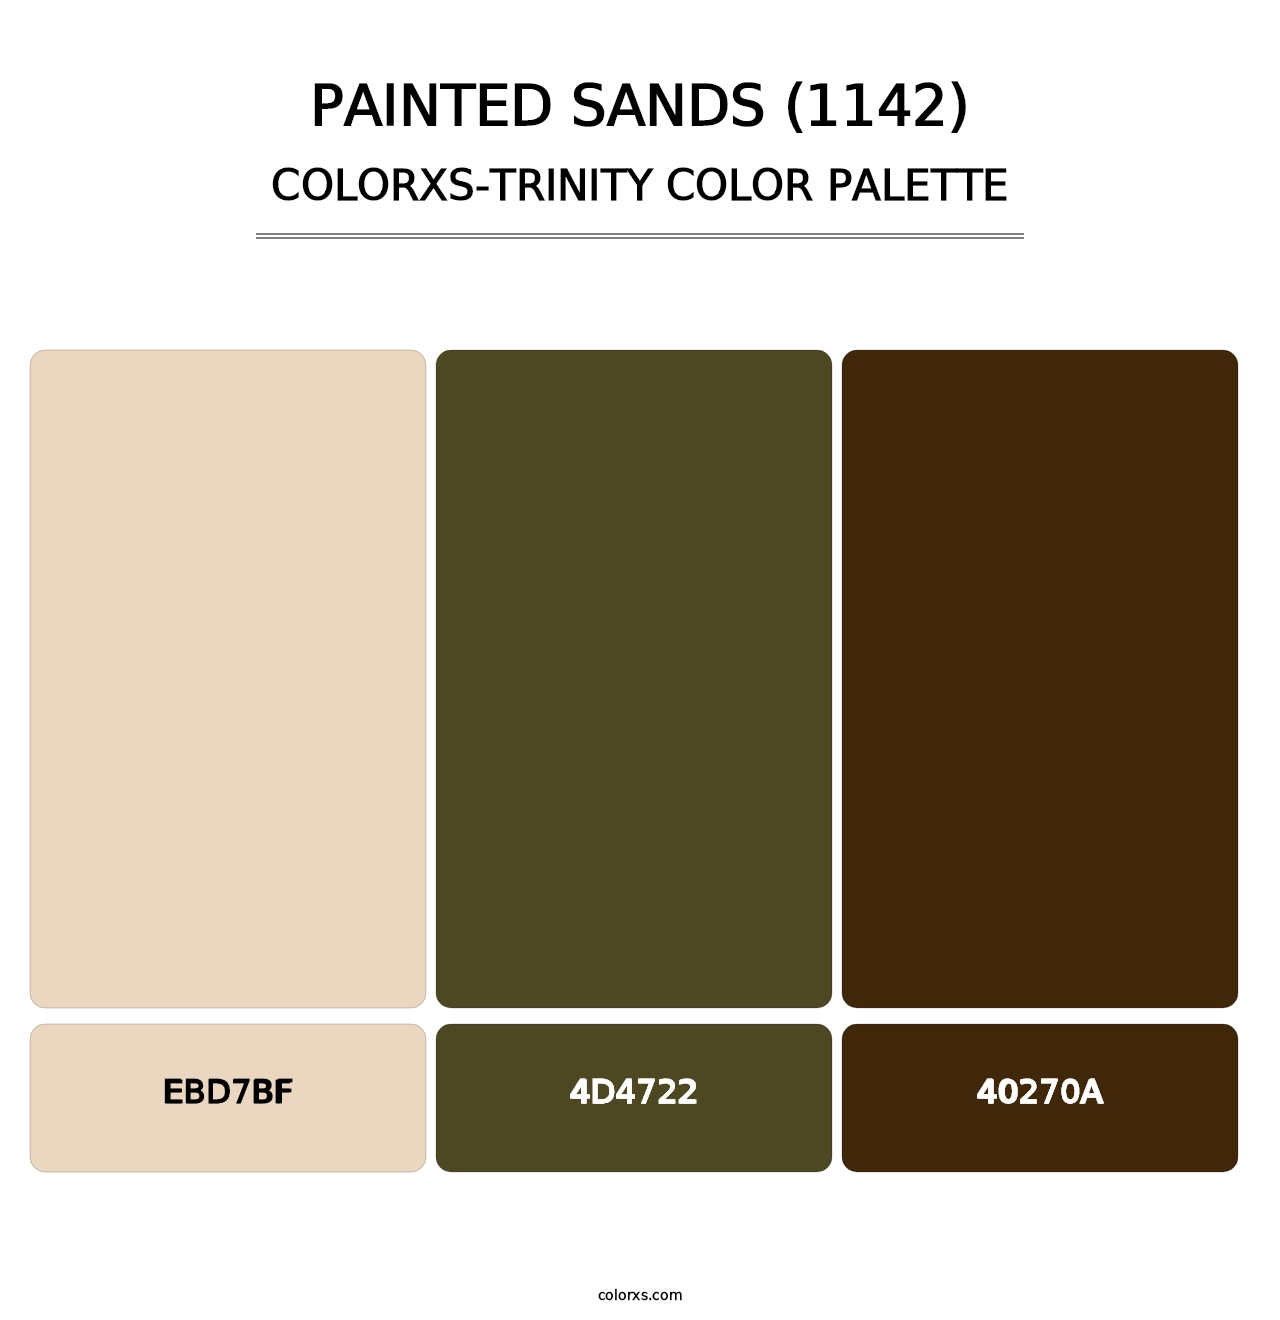 Painted Sands (1142) - Colorxs Trinity Palette